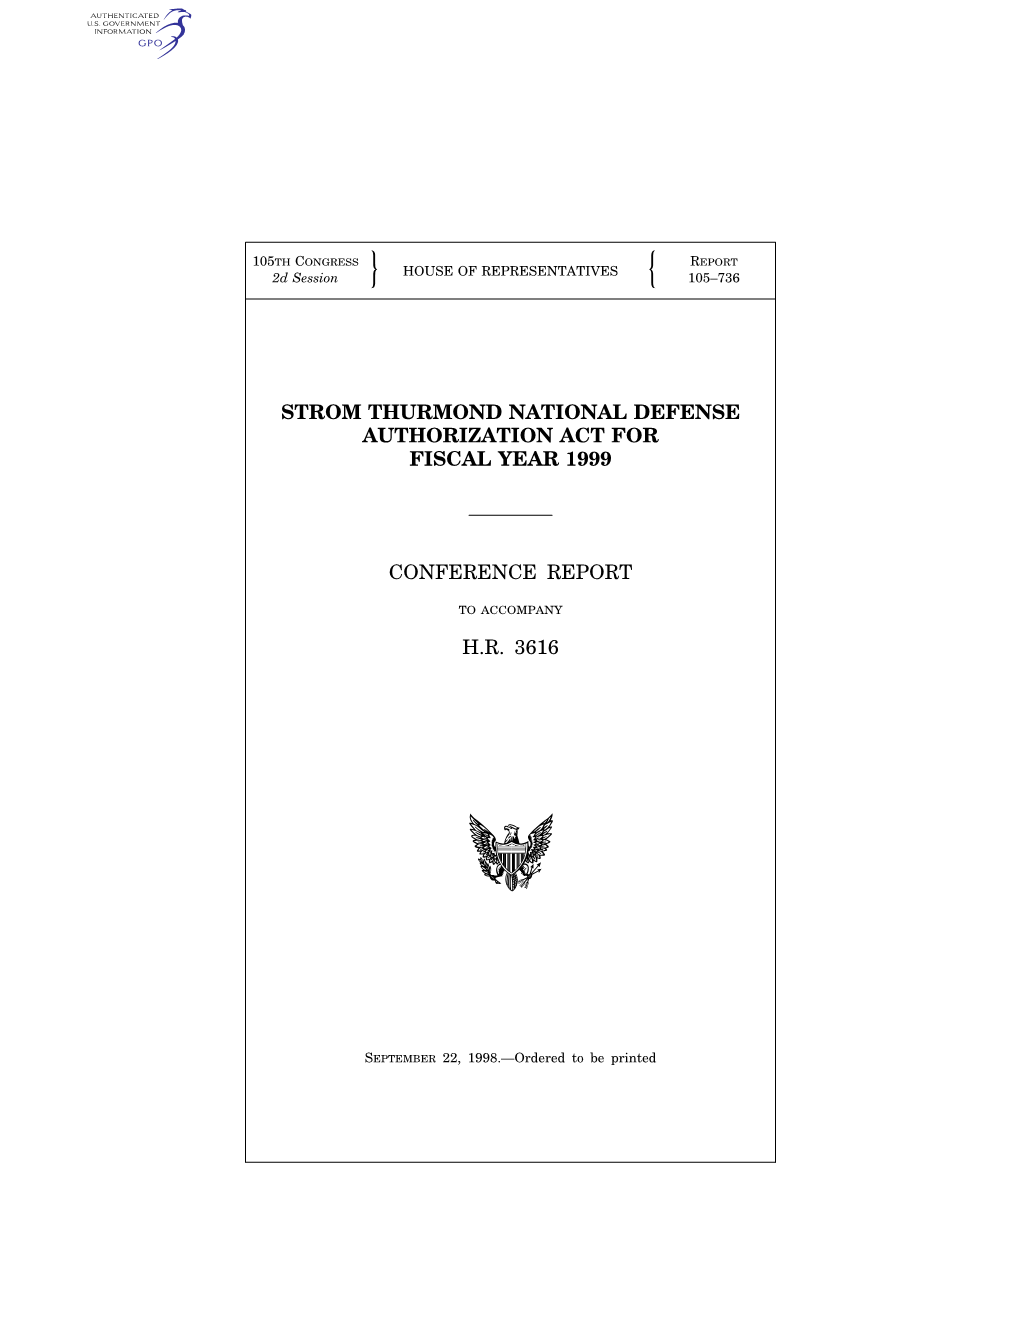 Strom Thurmond National Defense Authorization Act for Fiscal Year 1999